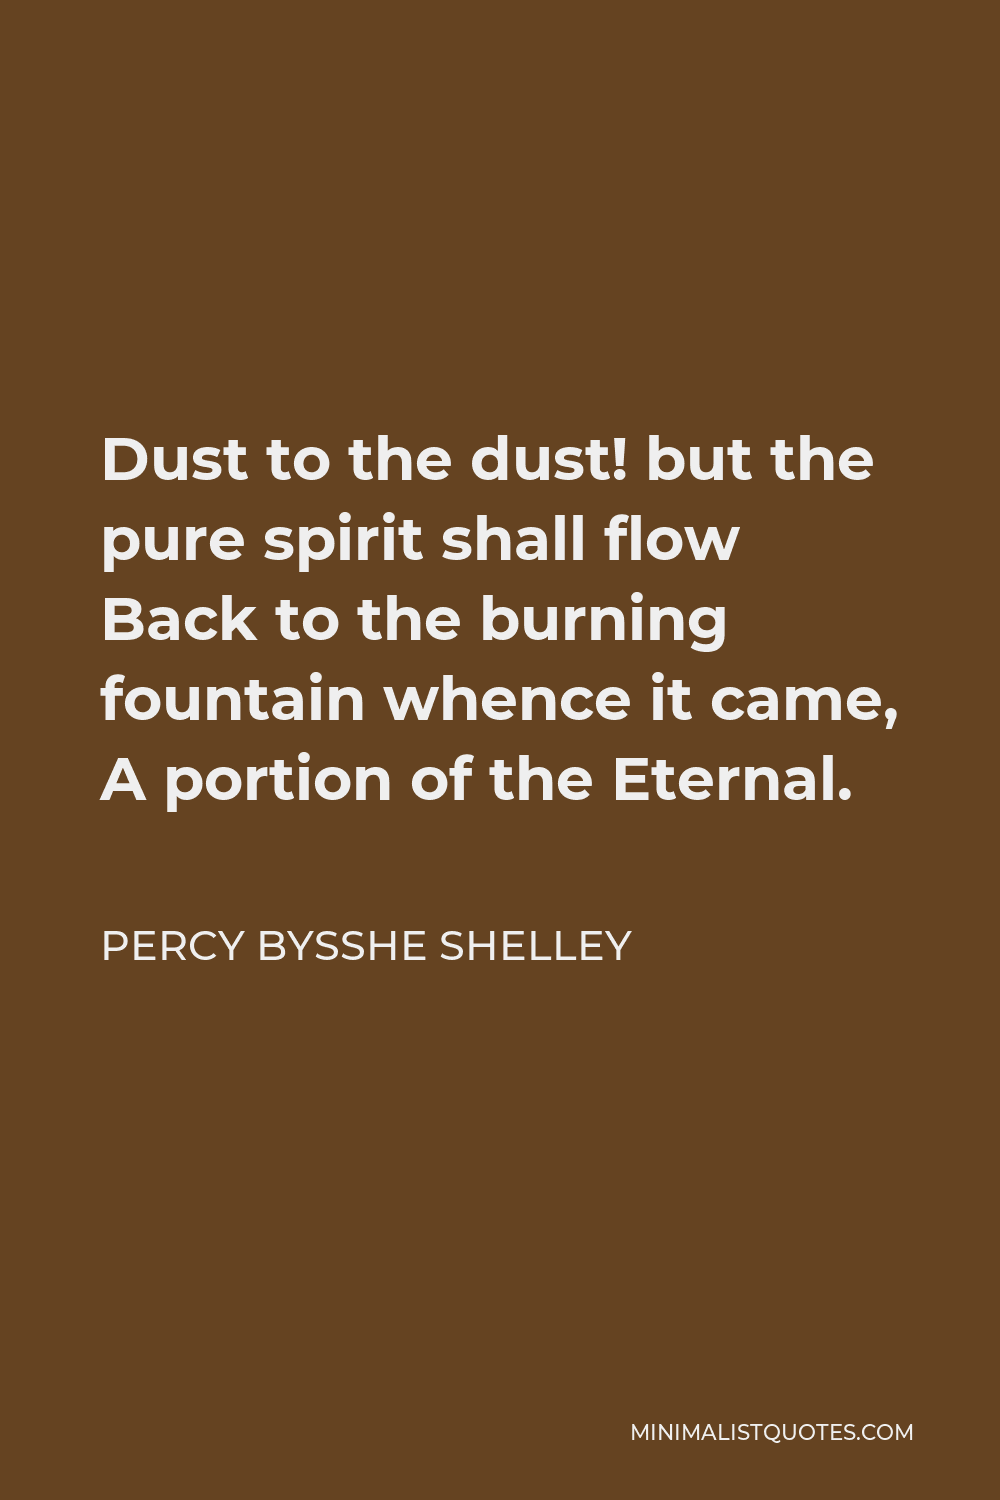 Percy Bysshe Shelley Quote - Dust to the dust! but the pure spirit shall flow Back to the burning fountain whence it came, A portion of the Eternal.